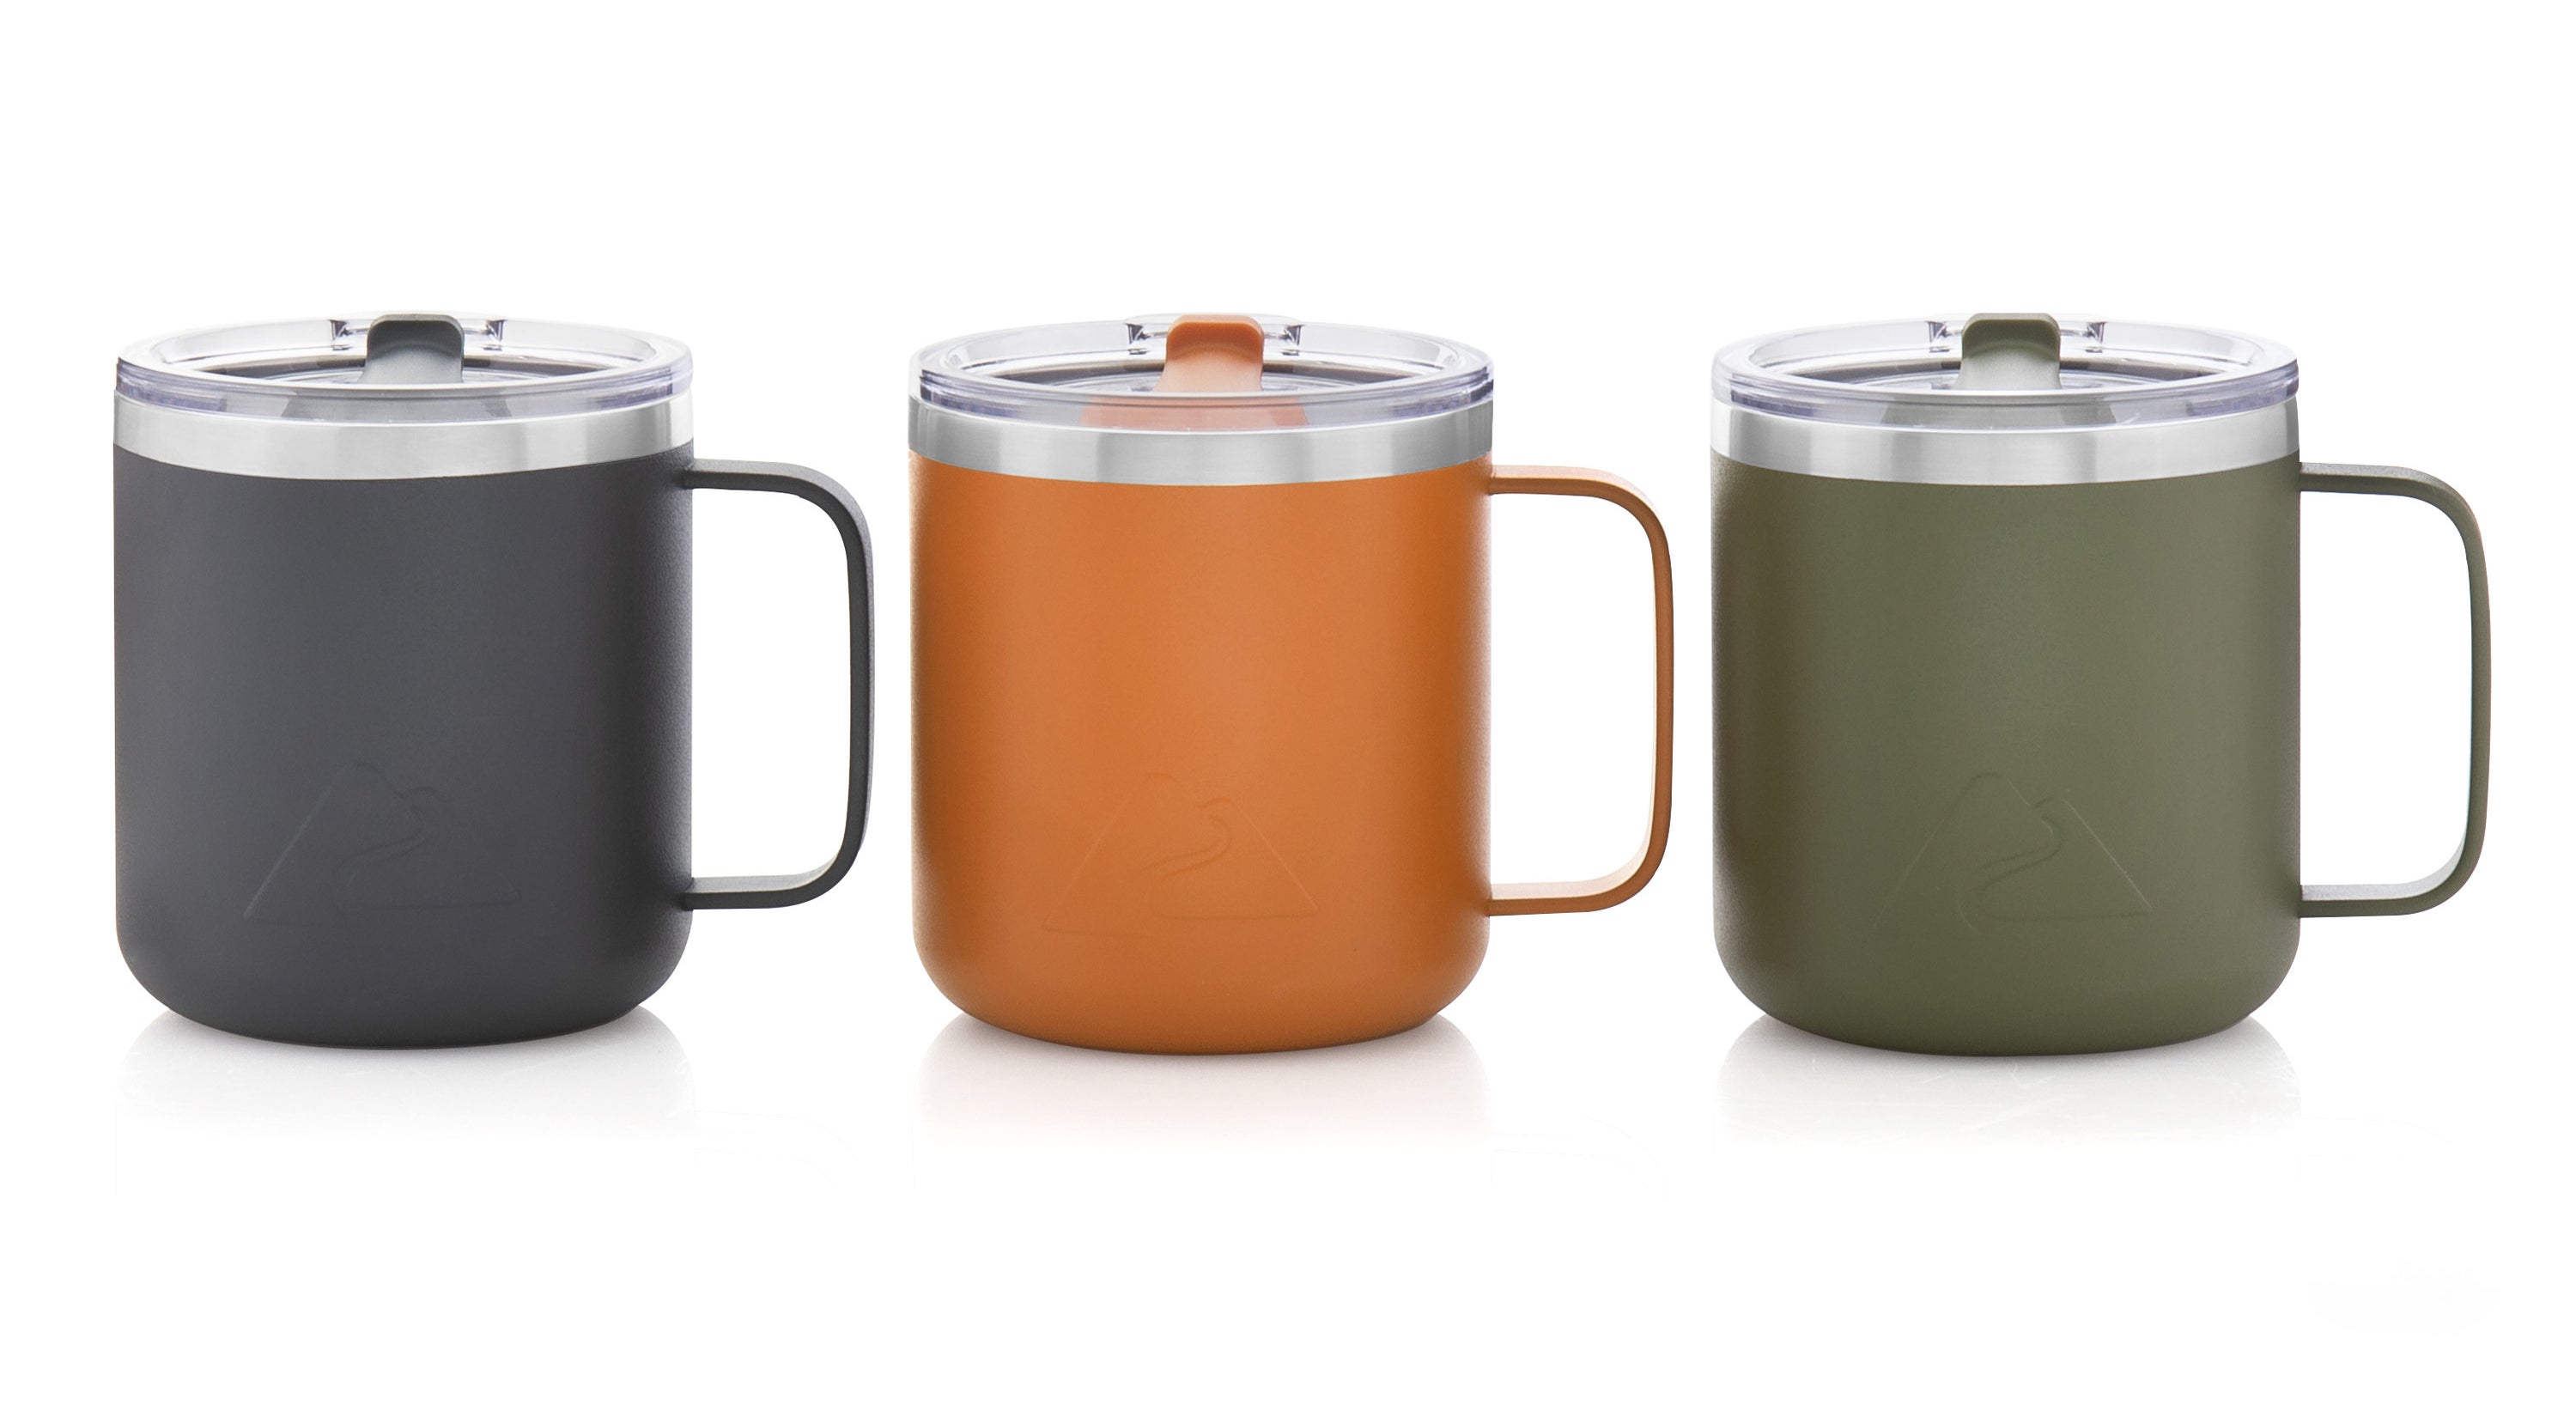 three stainless steel coffee mugs in gray, orange, and green